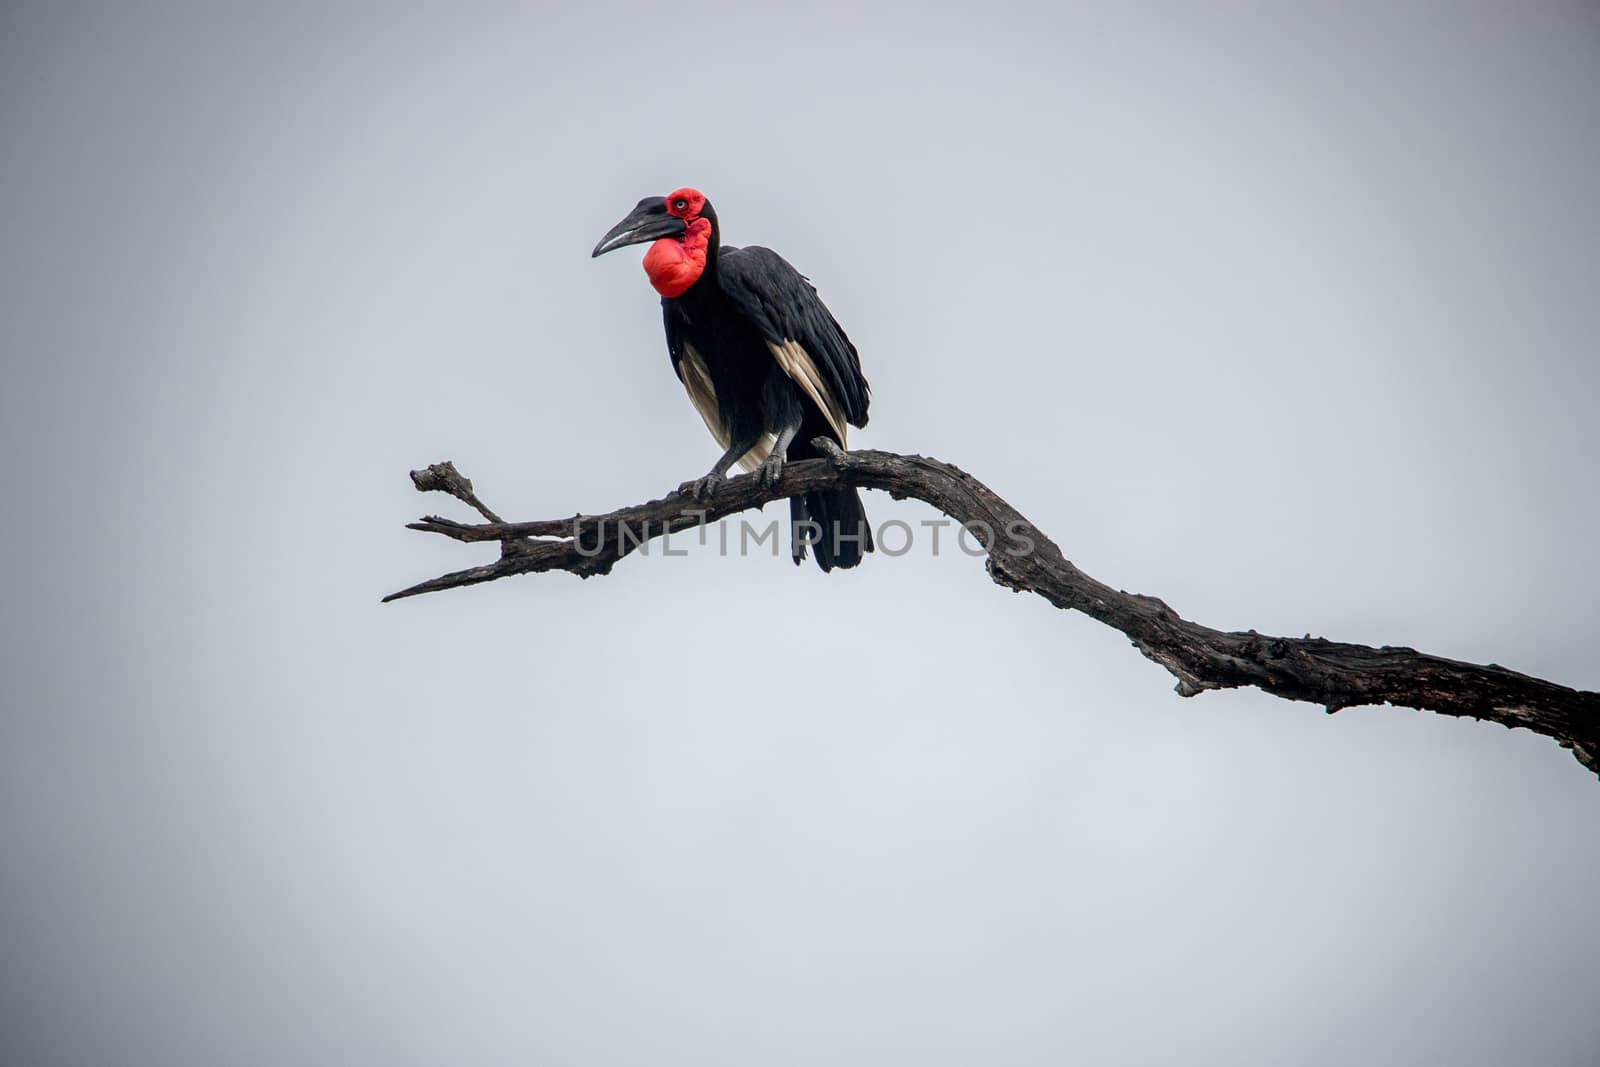 Southern ground hornbill on a branch in the Kruger National Park, South Africa.